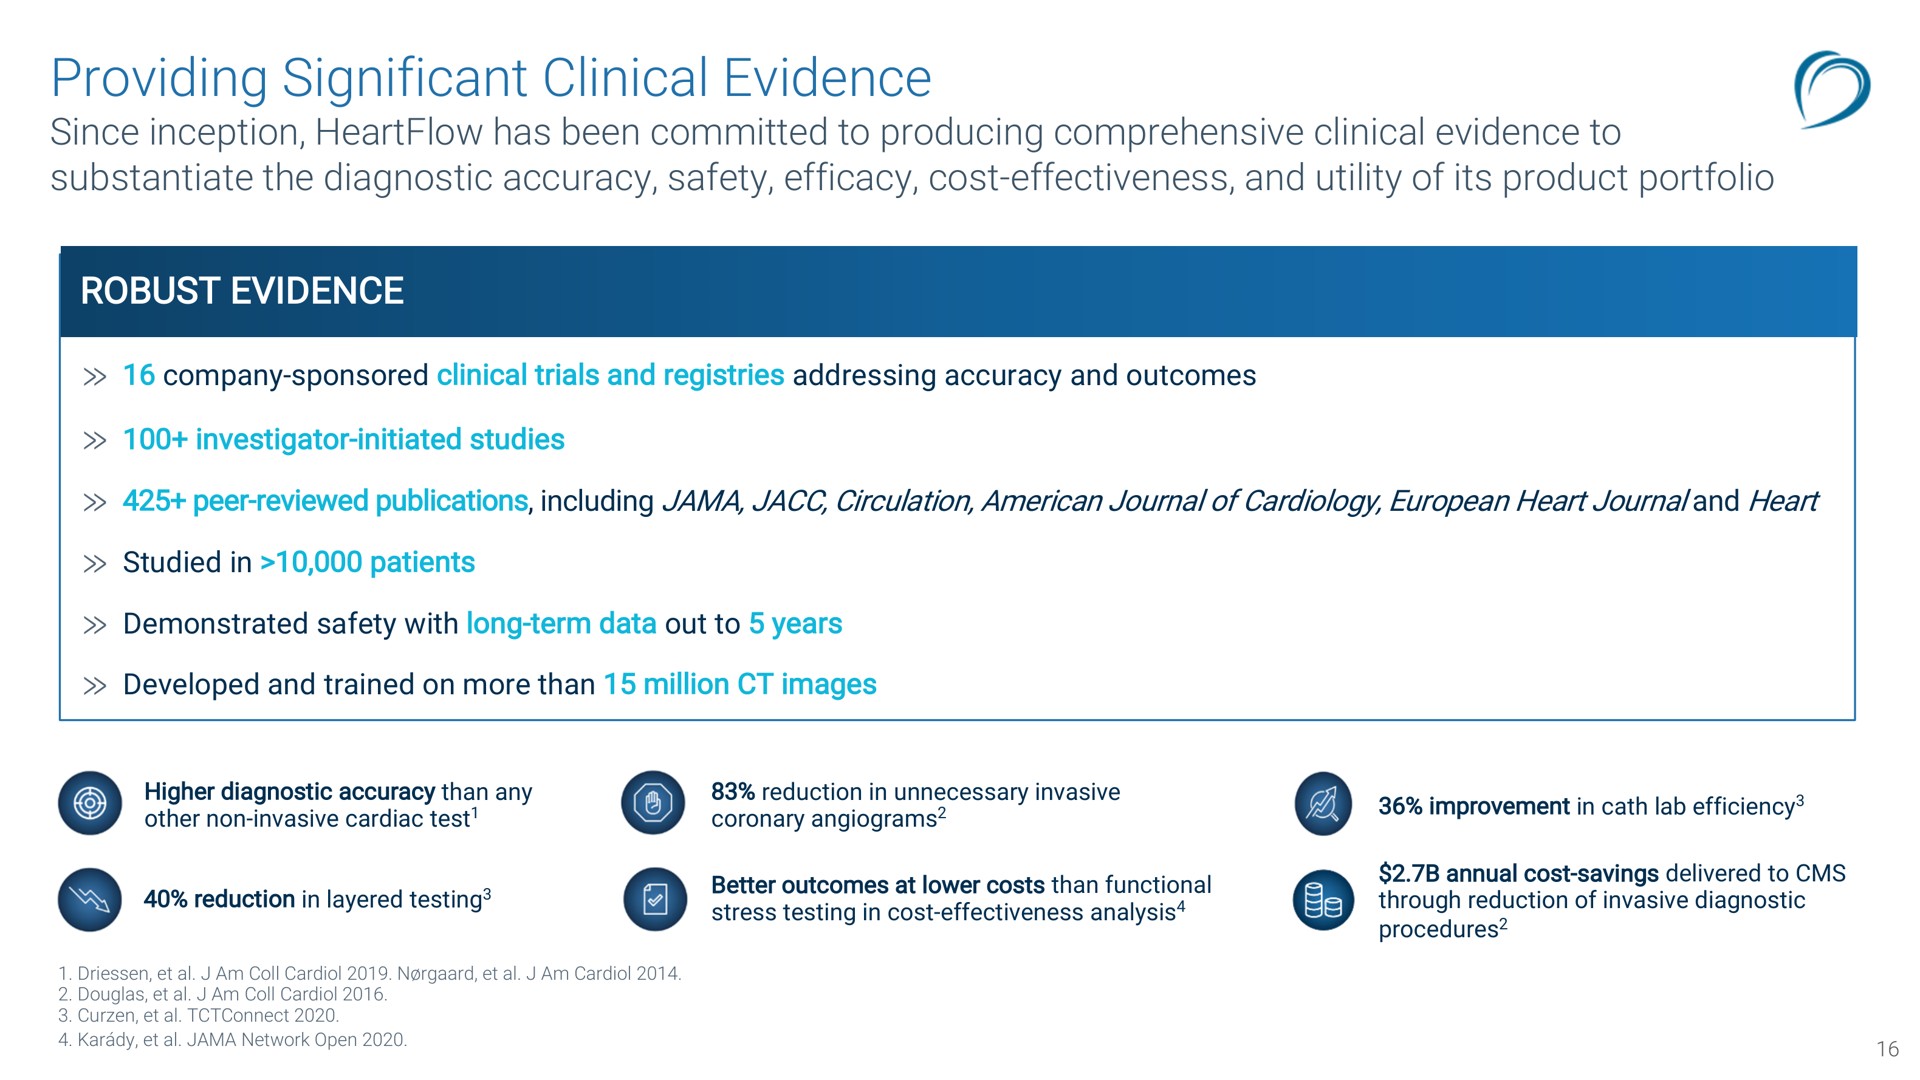 providing significant clinical evidence | HearFlow